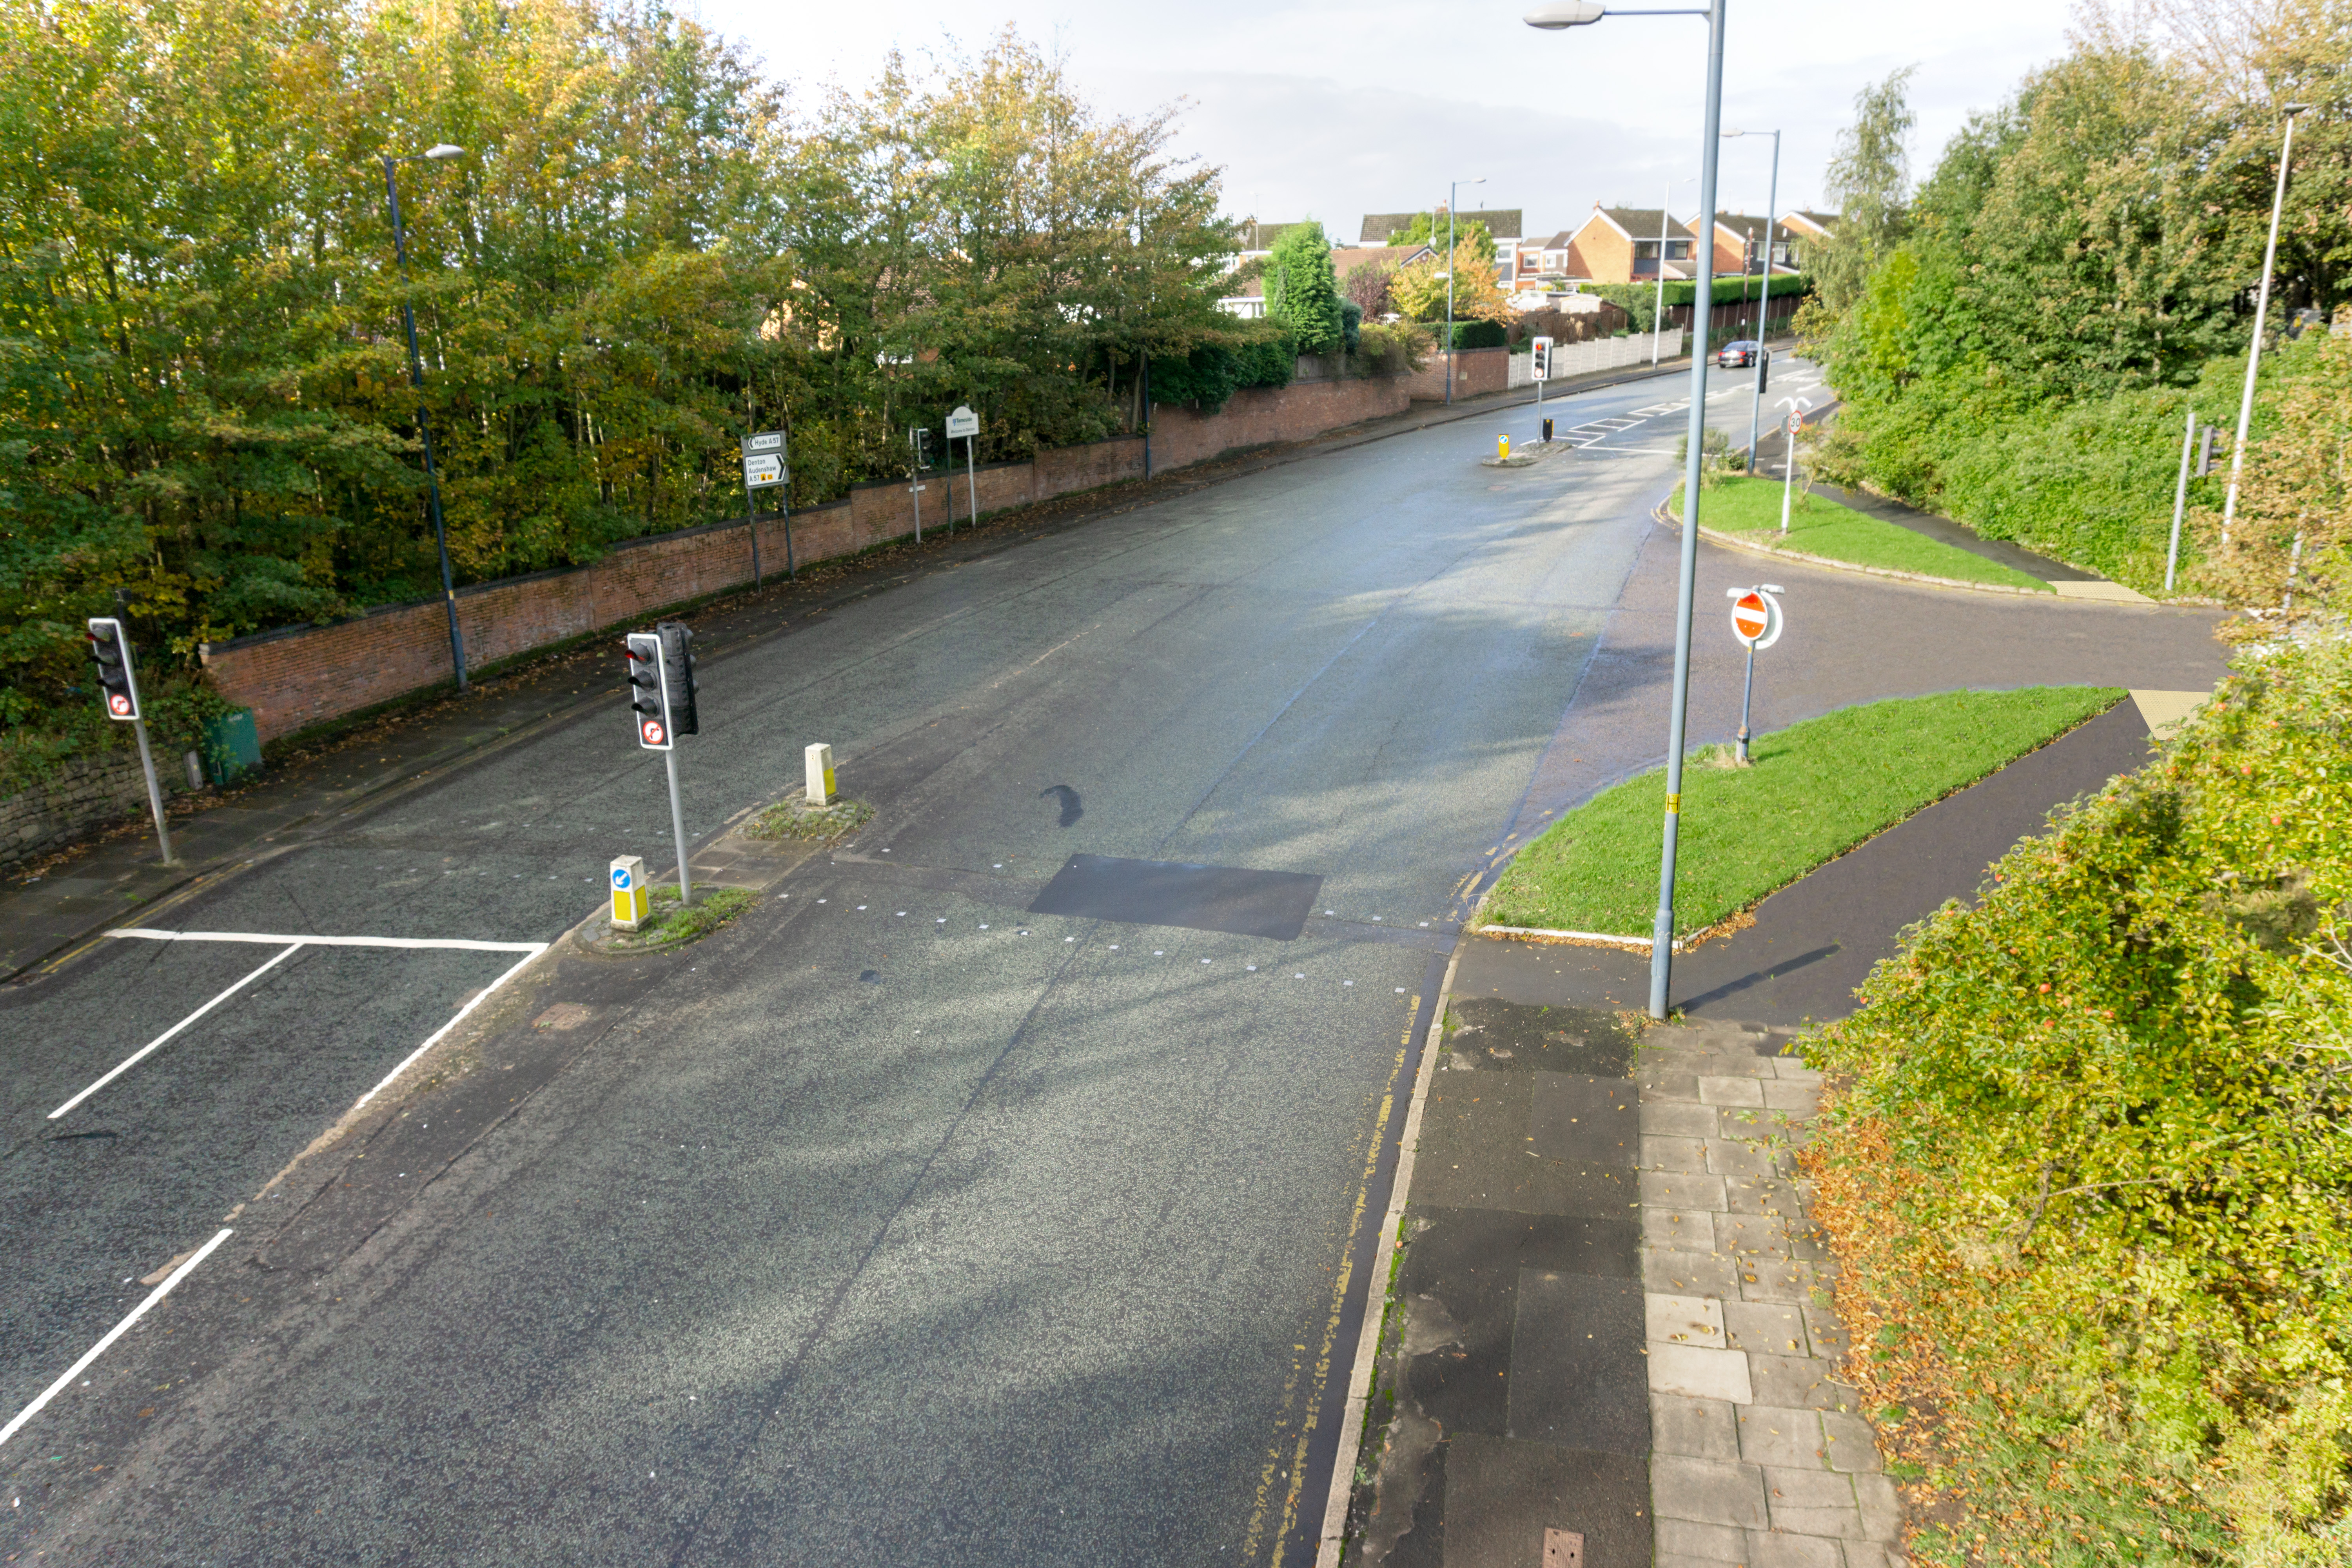 An image of the junction at Crown Point, Denton